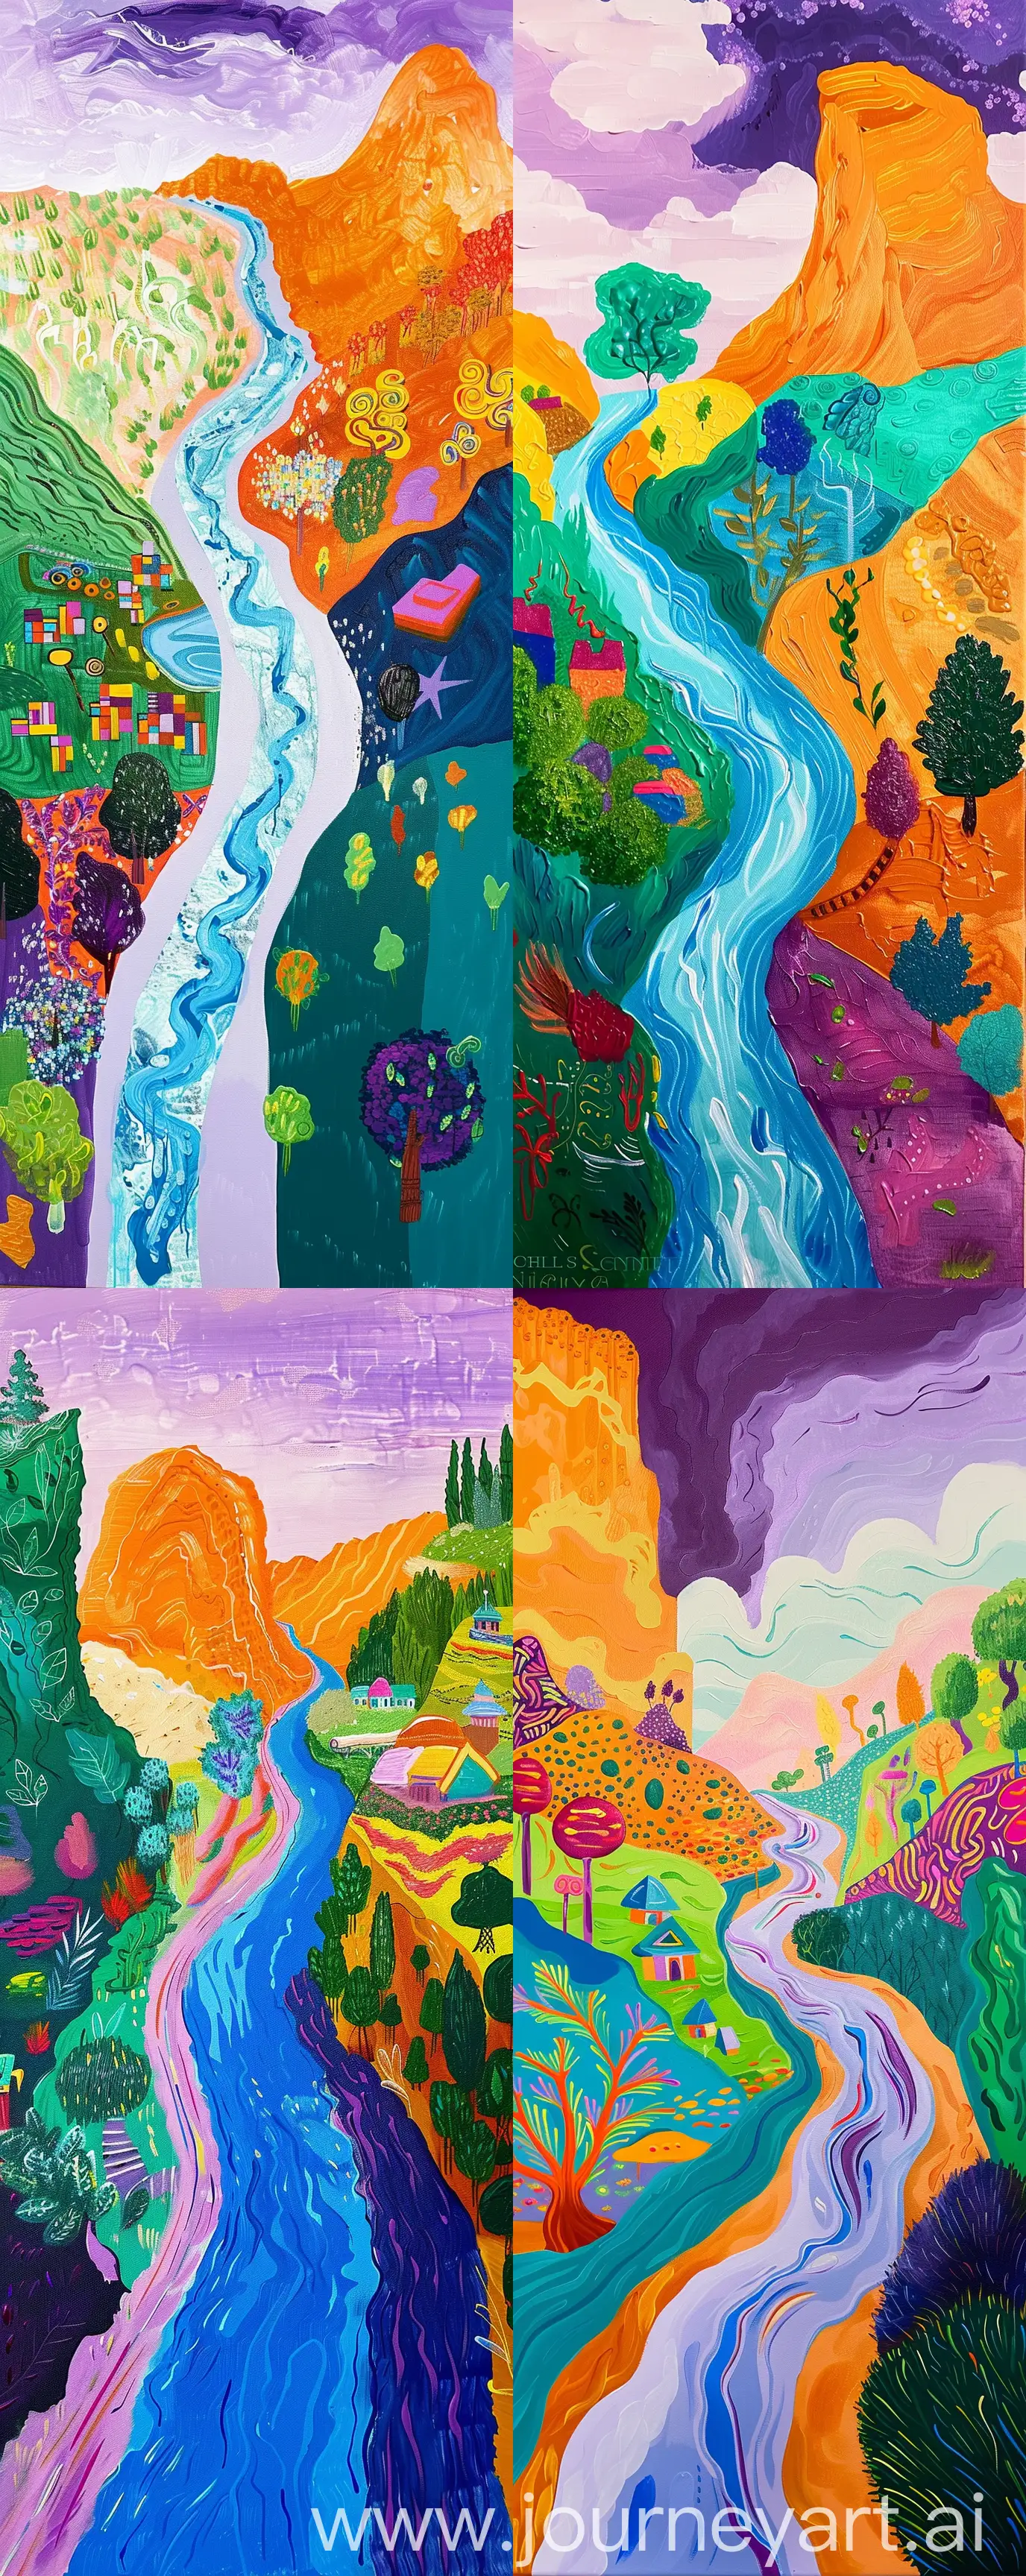 Whimsical-Landscape-Painting-Vibrant-River-Scene-with-Colorful-Village